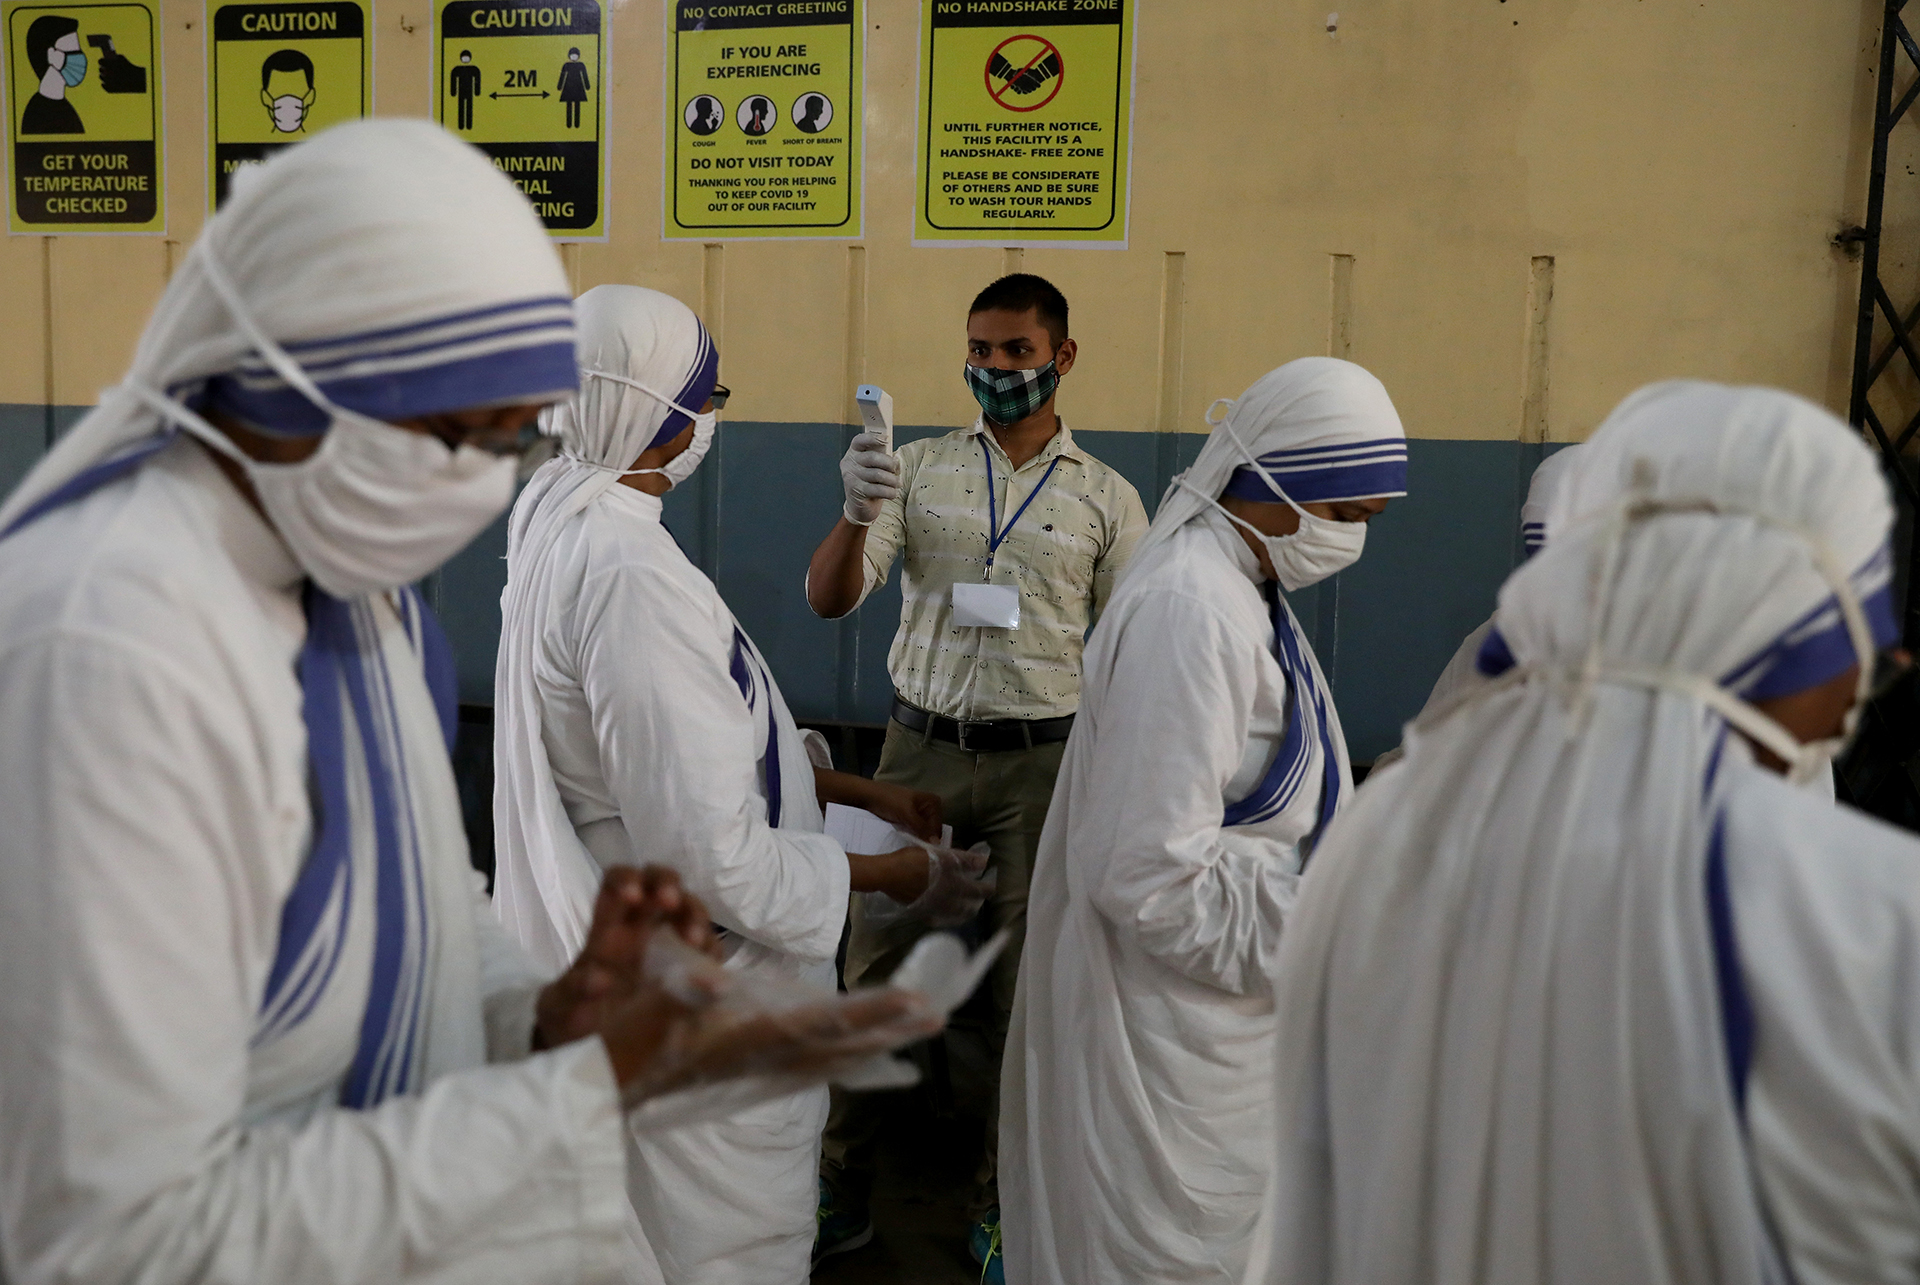 An election official checks the temperature of Catholic nuns from the Missionaries of Charity before they cast their vote at a polling station in Kolkata